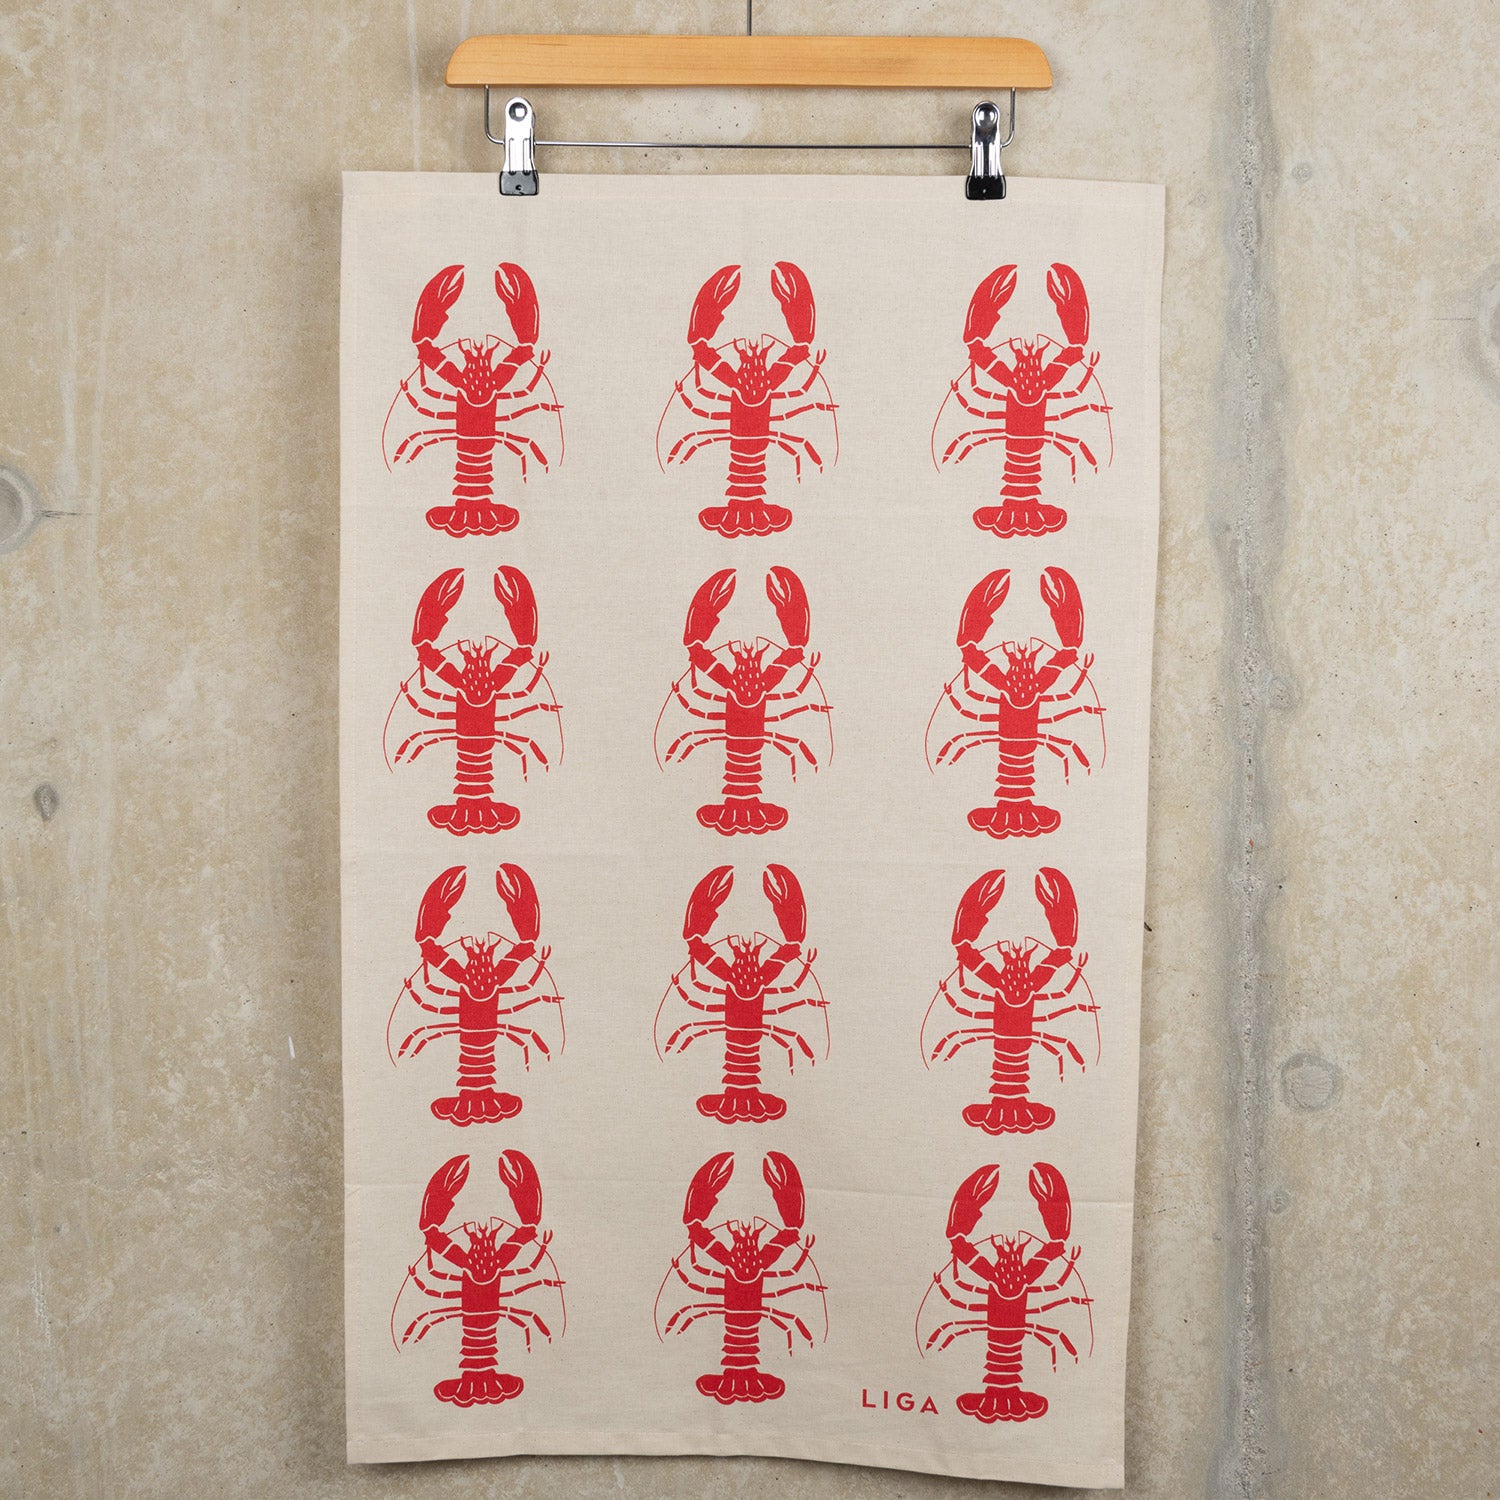 Red lobster repeating pattern on a cream coloured back ground. The Red Lobster Tea Towel is hanging from a clip hanger on a grey background.